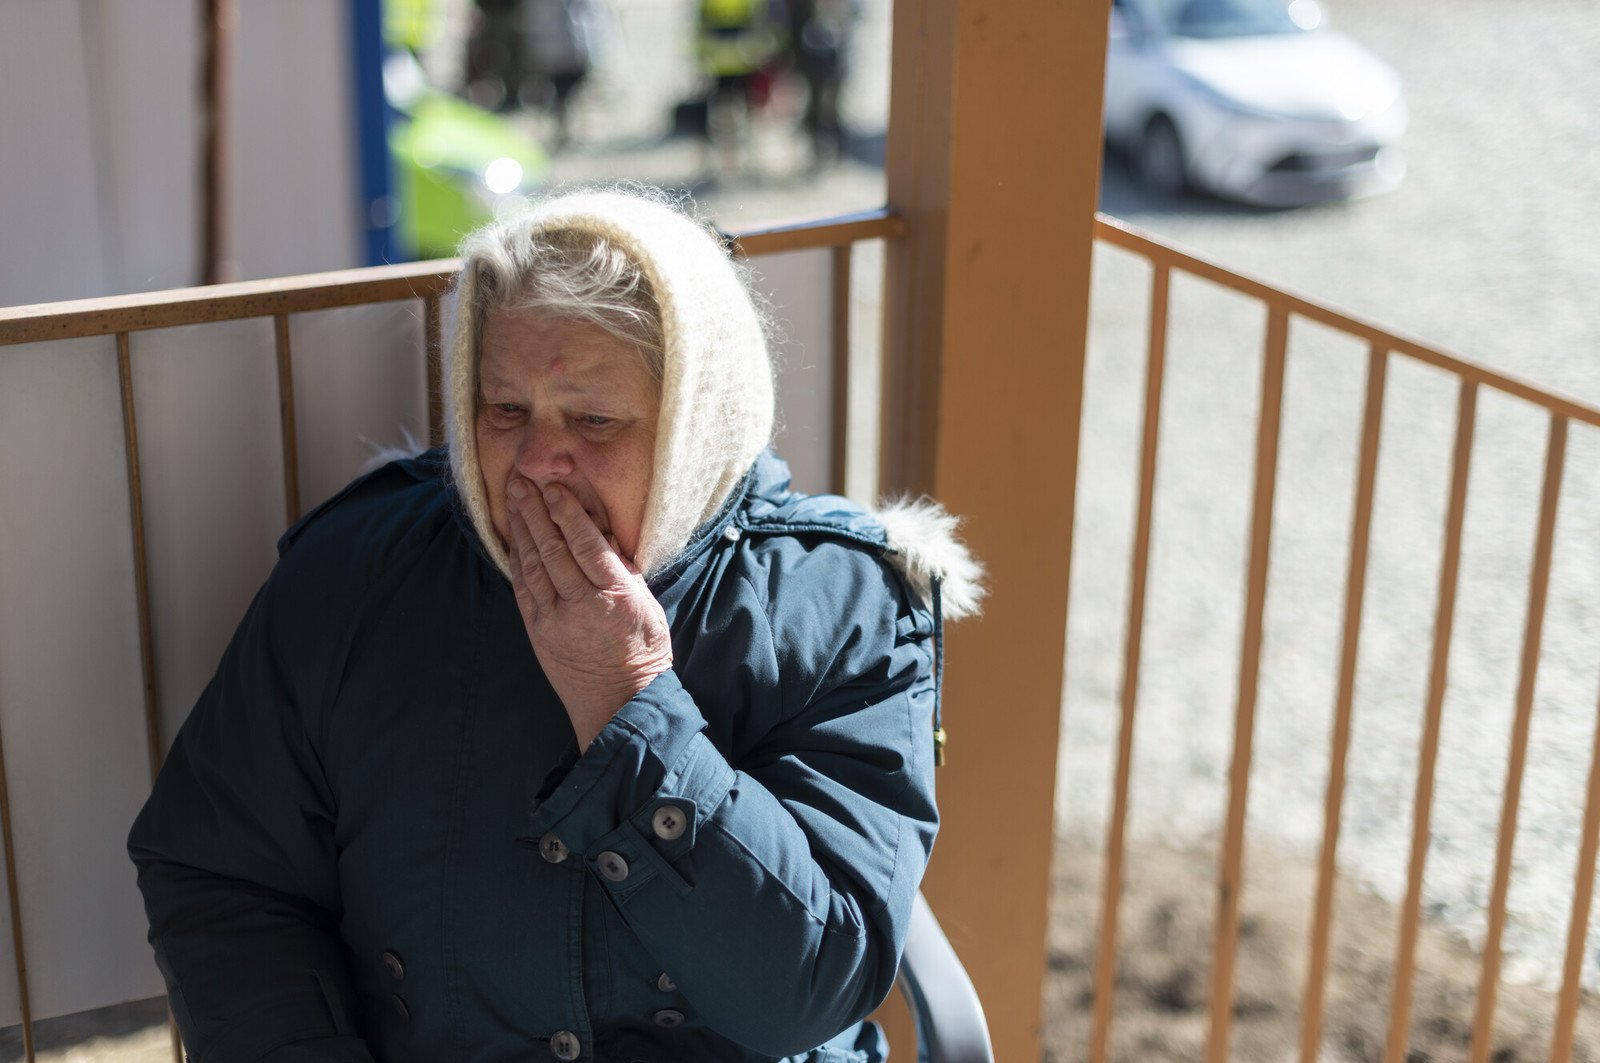 Grandma sitting on a porch with her hand over her mouth.